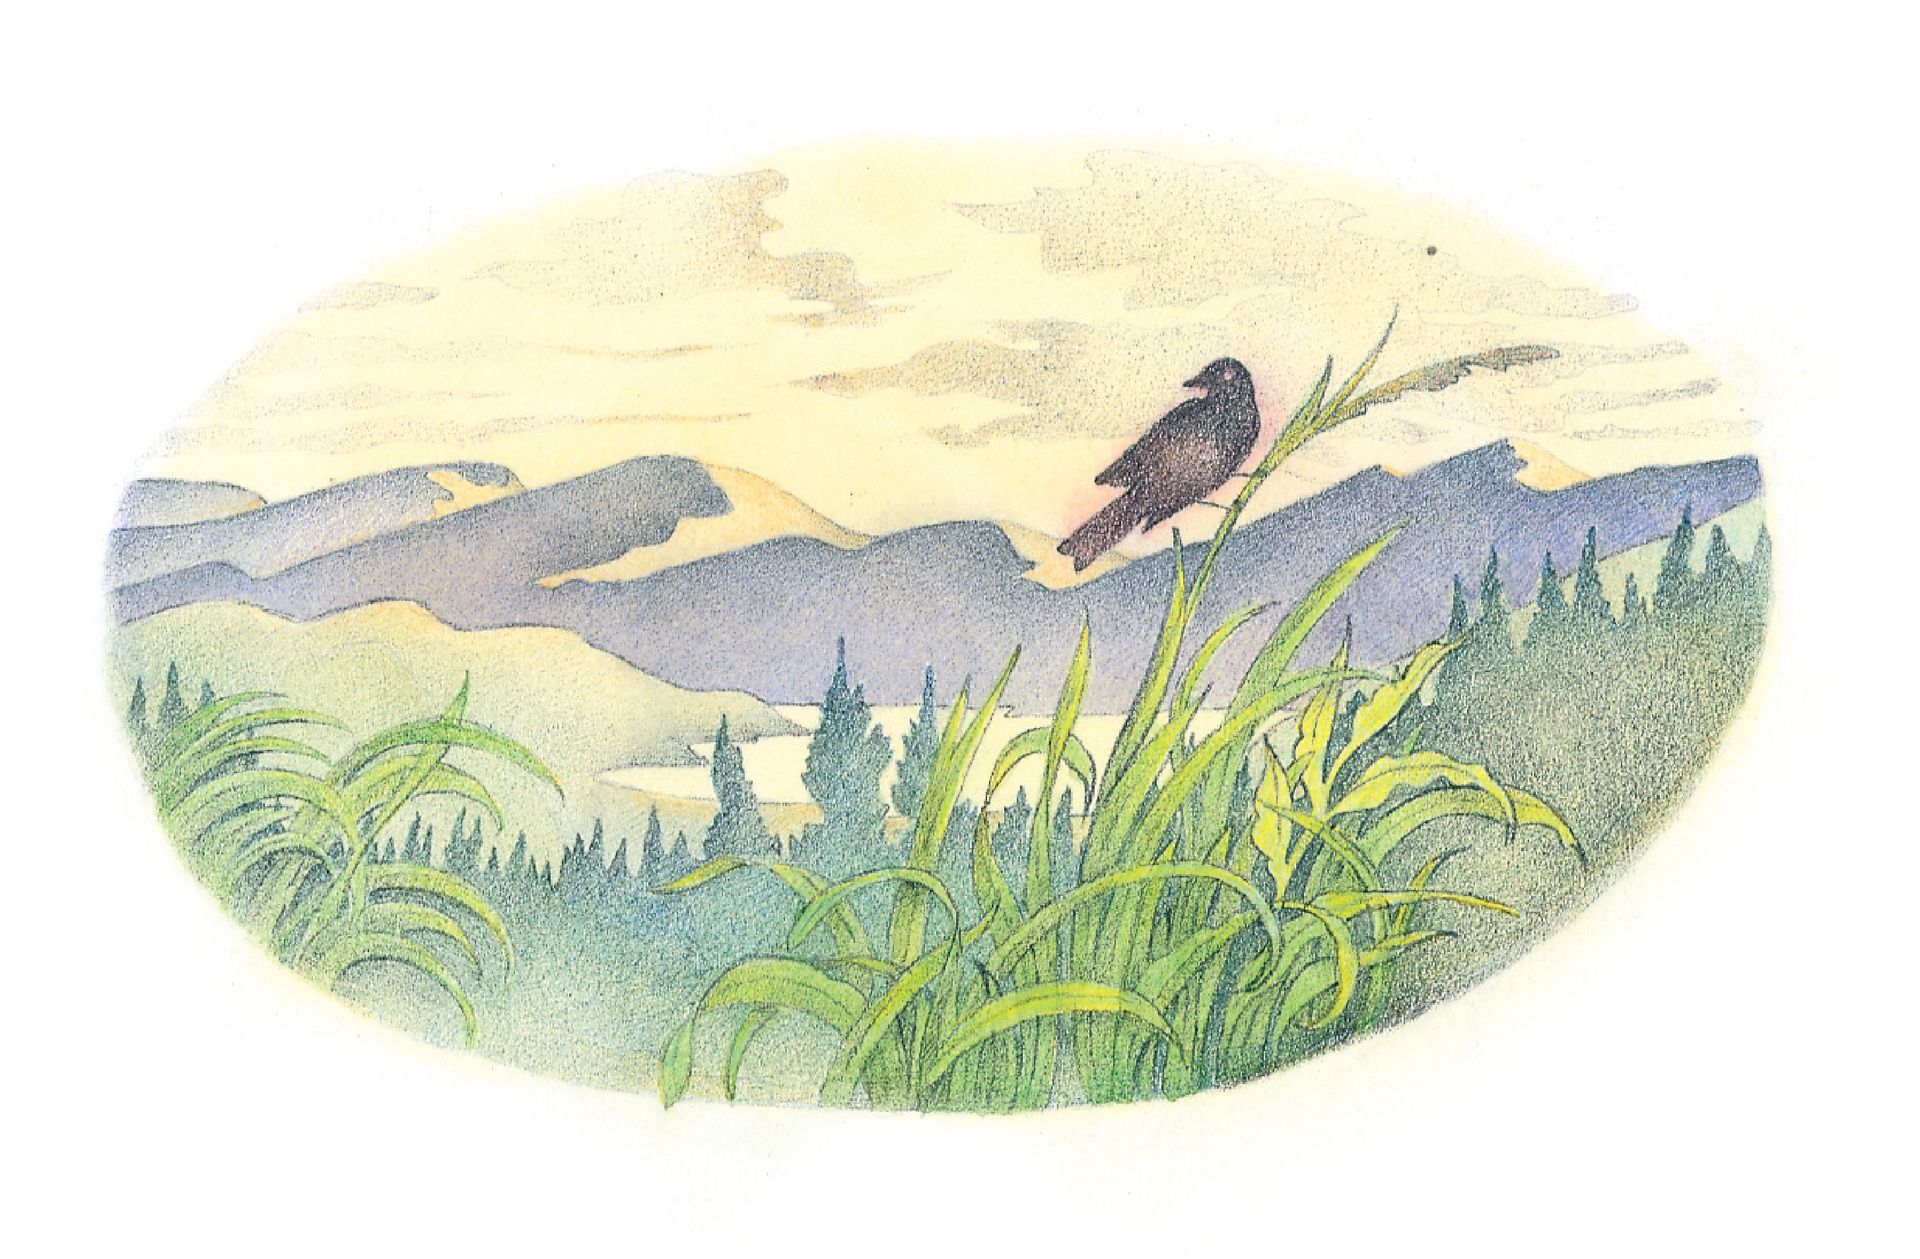 A bird landing on a long blade of grass. From the Children’s Songbook, page 288, “Impromptu”; watercolor illustration by Richard Hull.